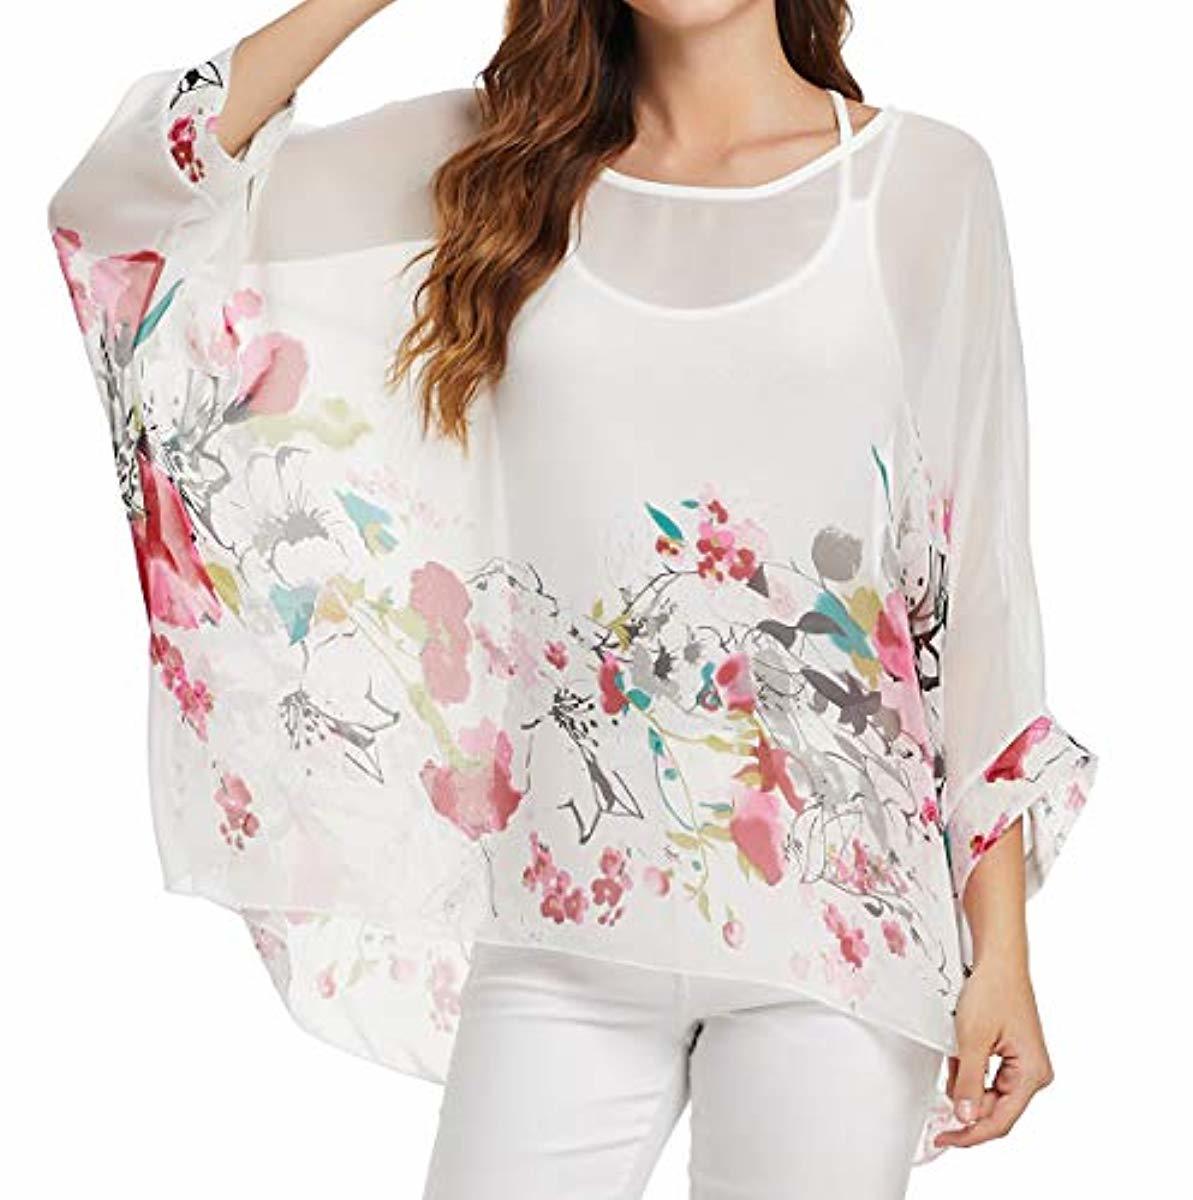 Women Chiffon Blouse Floral Batwing Sleeve Beach Cover Up Loose Tunic Shirt Tops